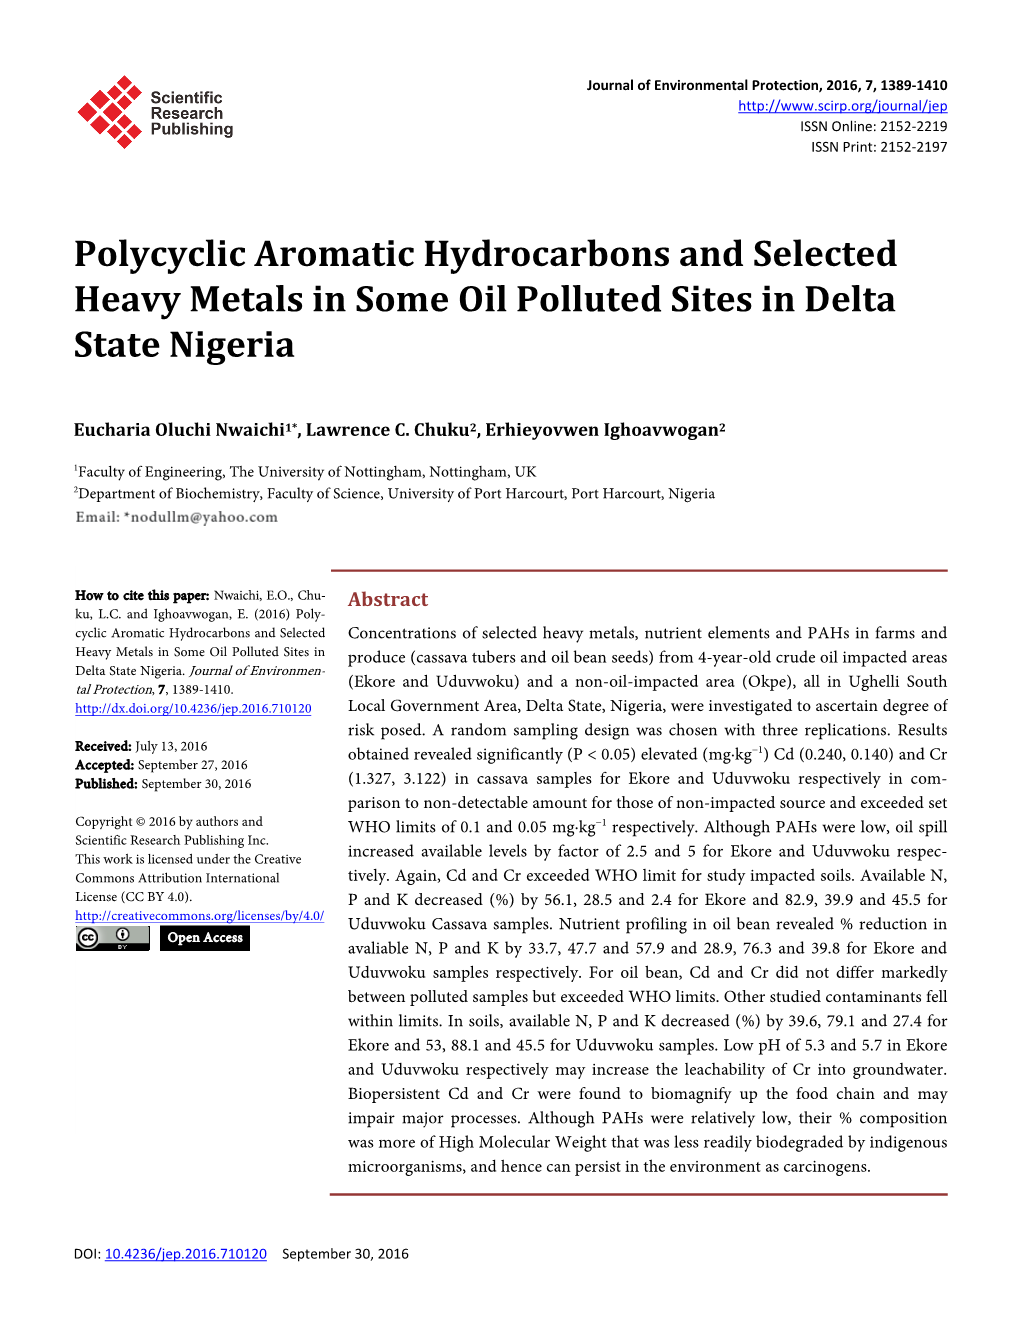 Polycyclic Aromatic Hydrocarbons and Selected Heavy Metals in Some Oil Polluted Sites in Delta State Nigeria